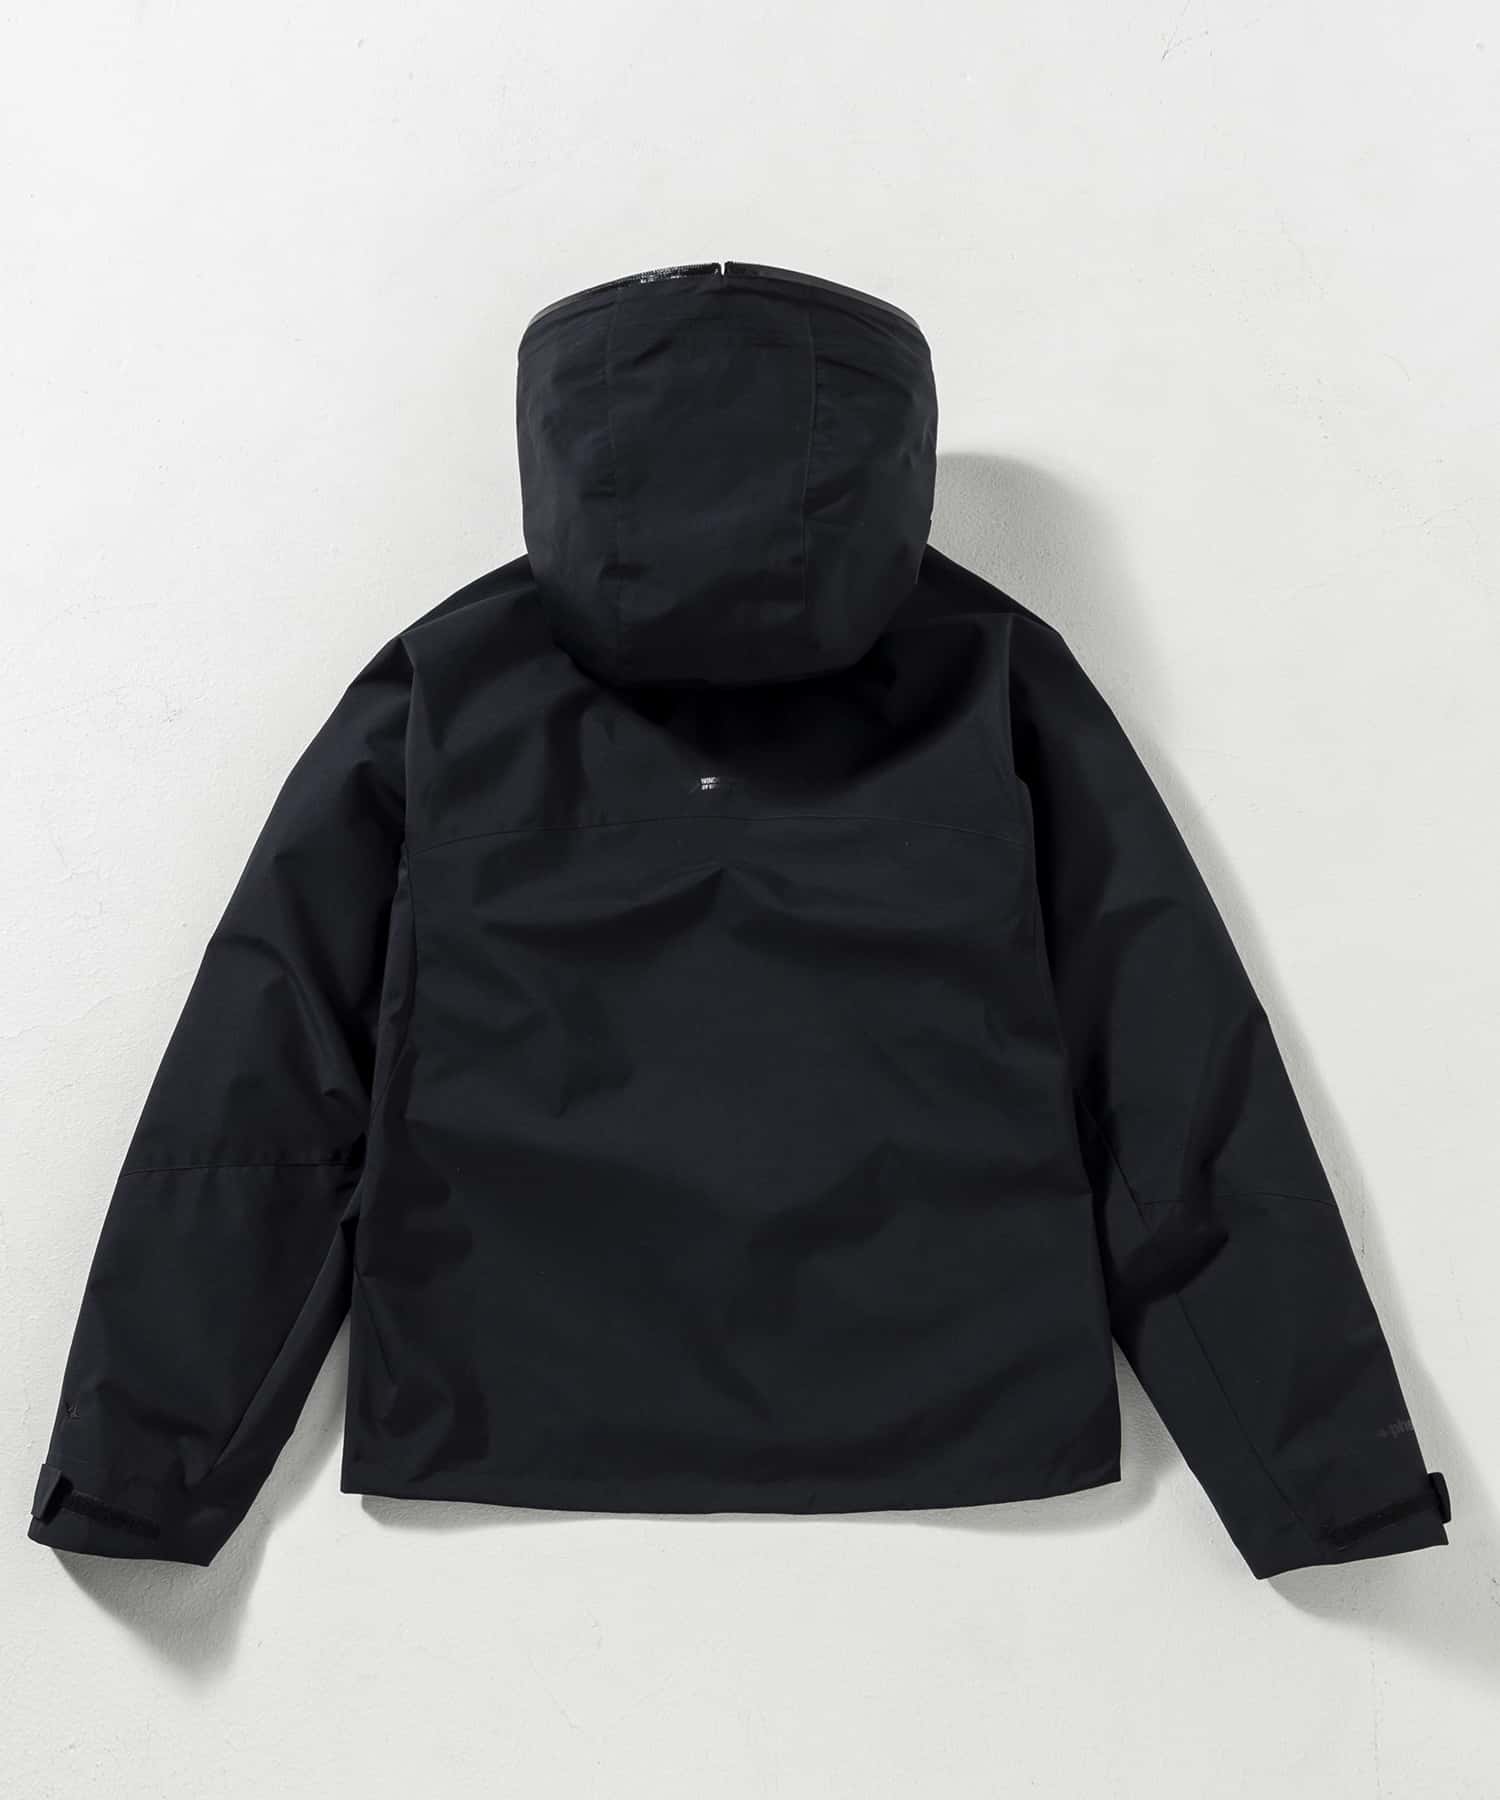 MENS】マウンテンパーカー WINDSTOPPER(R) プロダクト by GORE-TEX